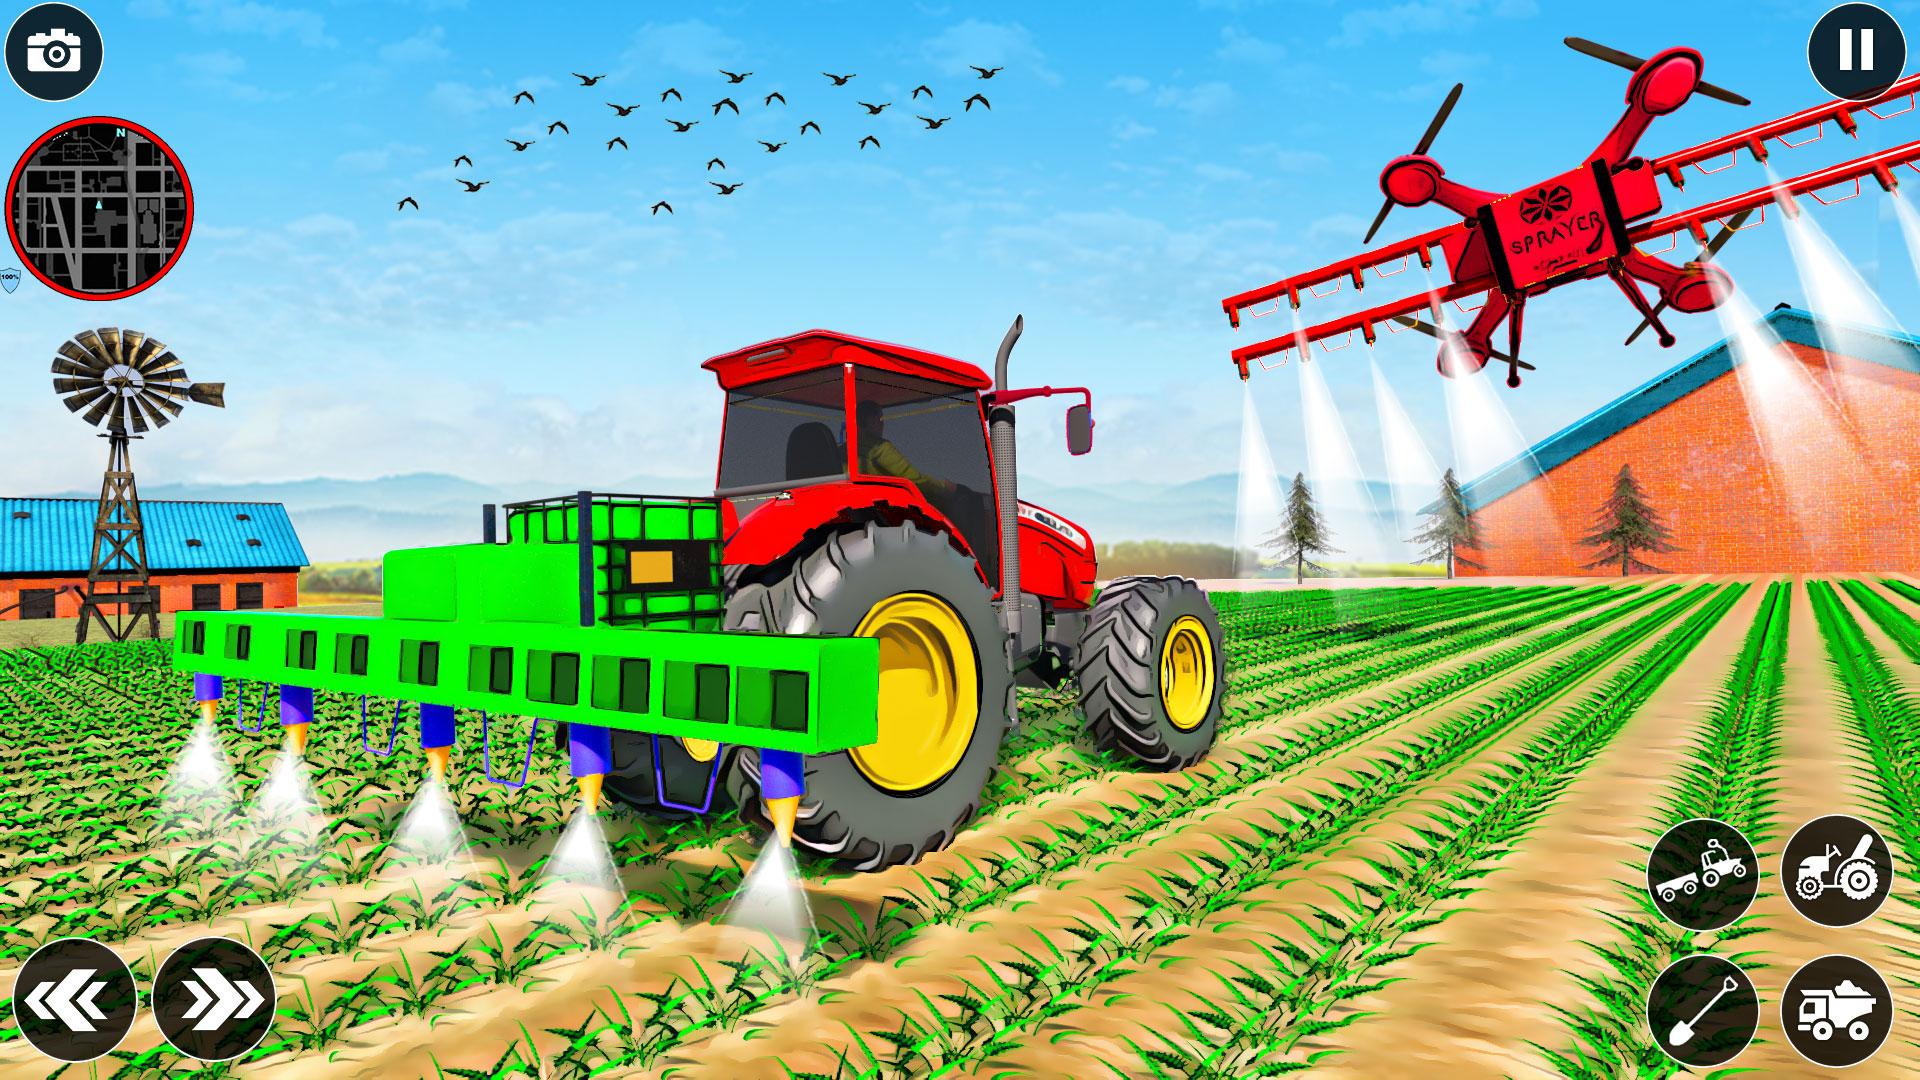 Tractor from the Hill PNG. Игра трактор в марте